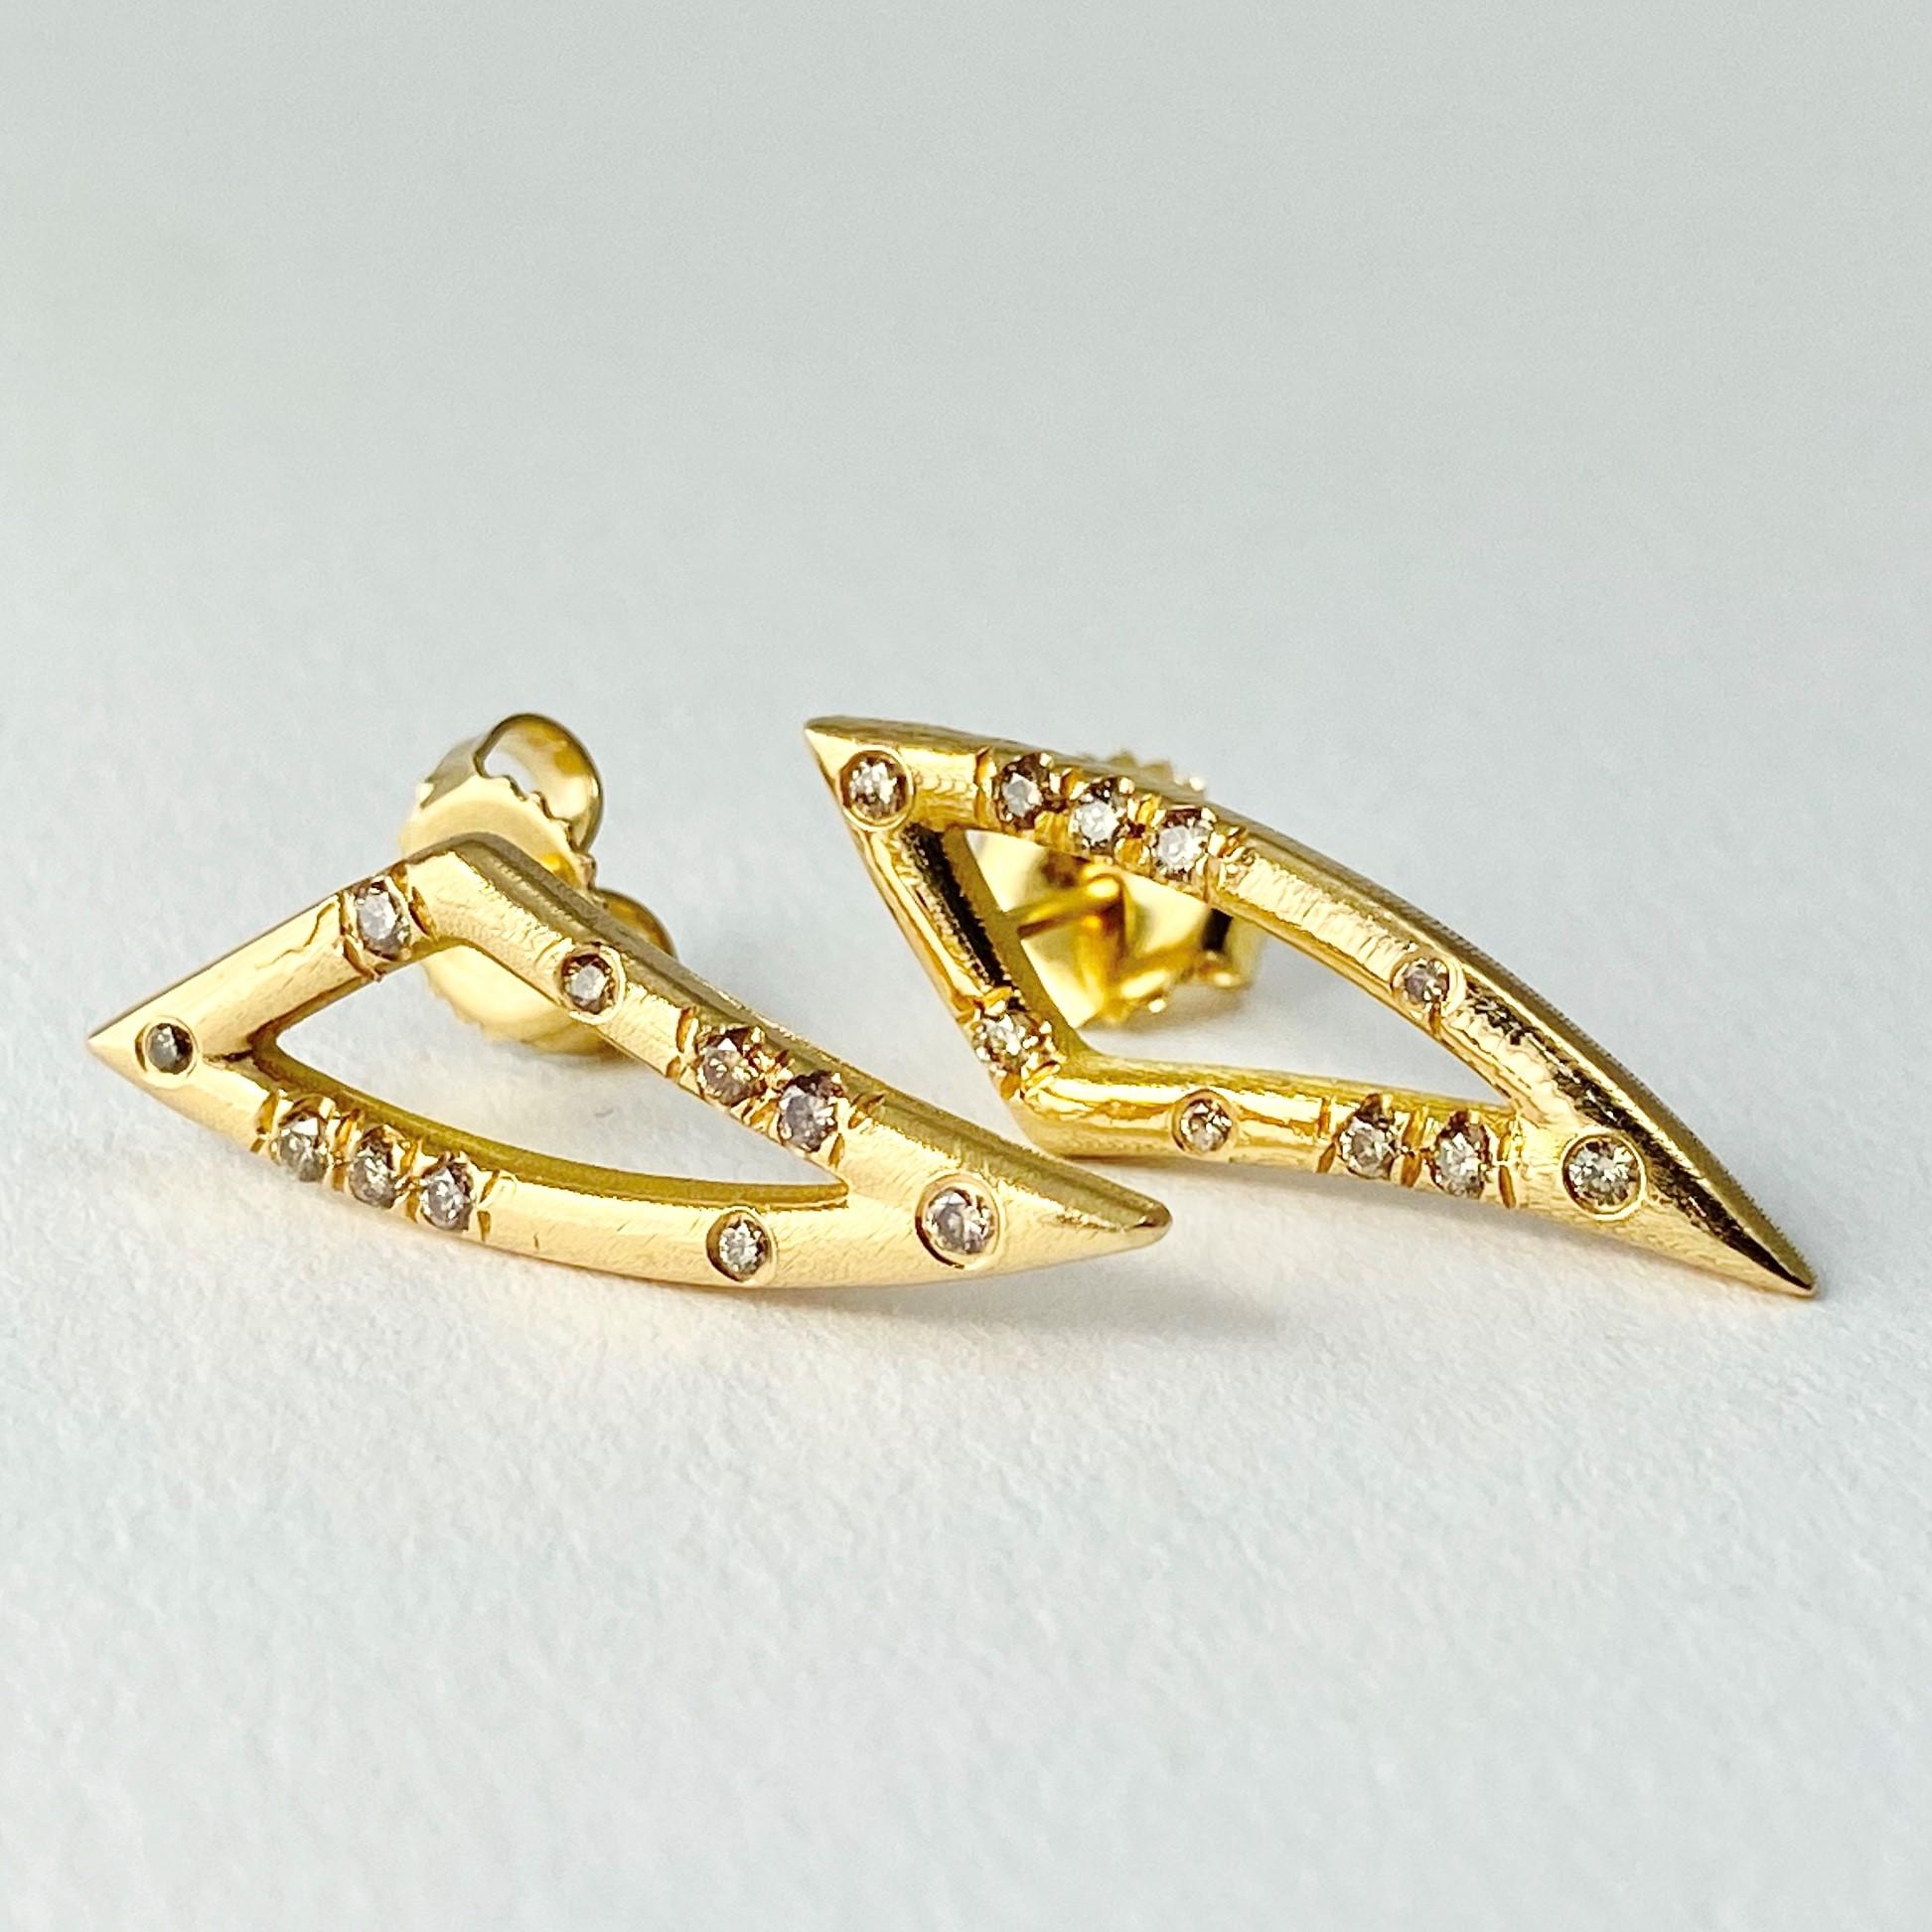 This Pair of Tusk stud earrings, from our Barefoot Collection, is hand-crafted with 18-karat recycled yellow gold, and feature 20 round brilliant, champagne accent diamonds. Finished with stud posts, and supplied with extra-large backs. Made in